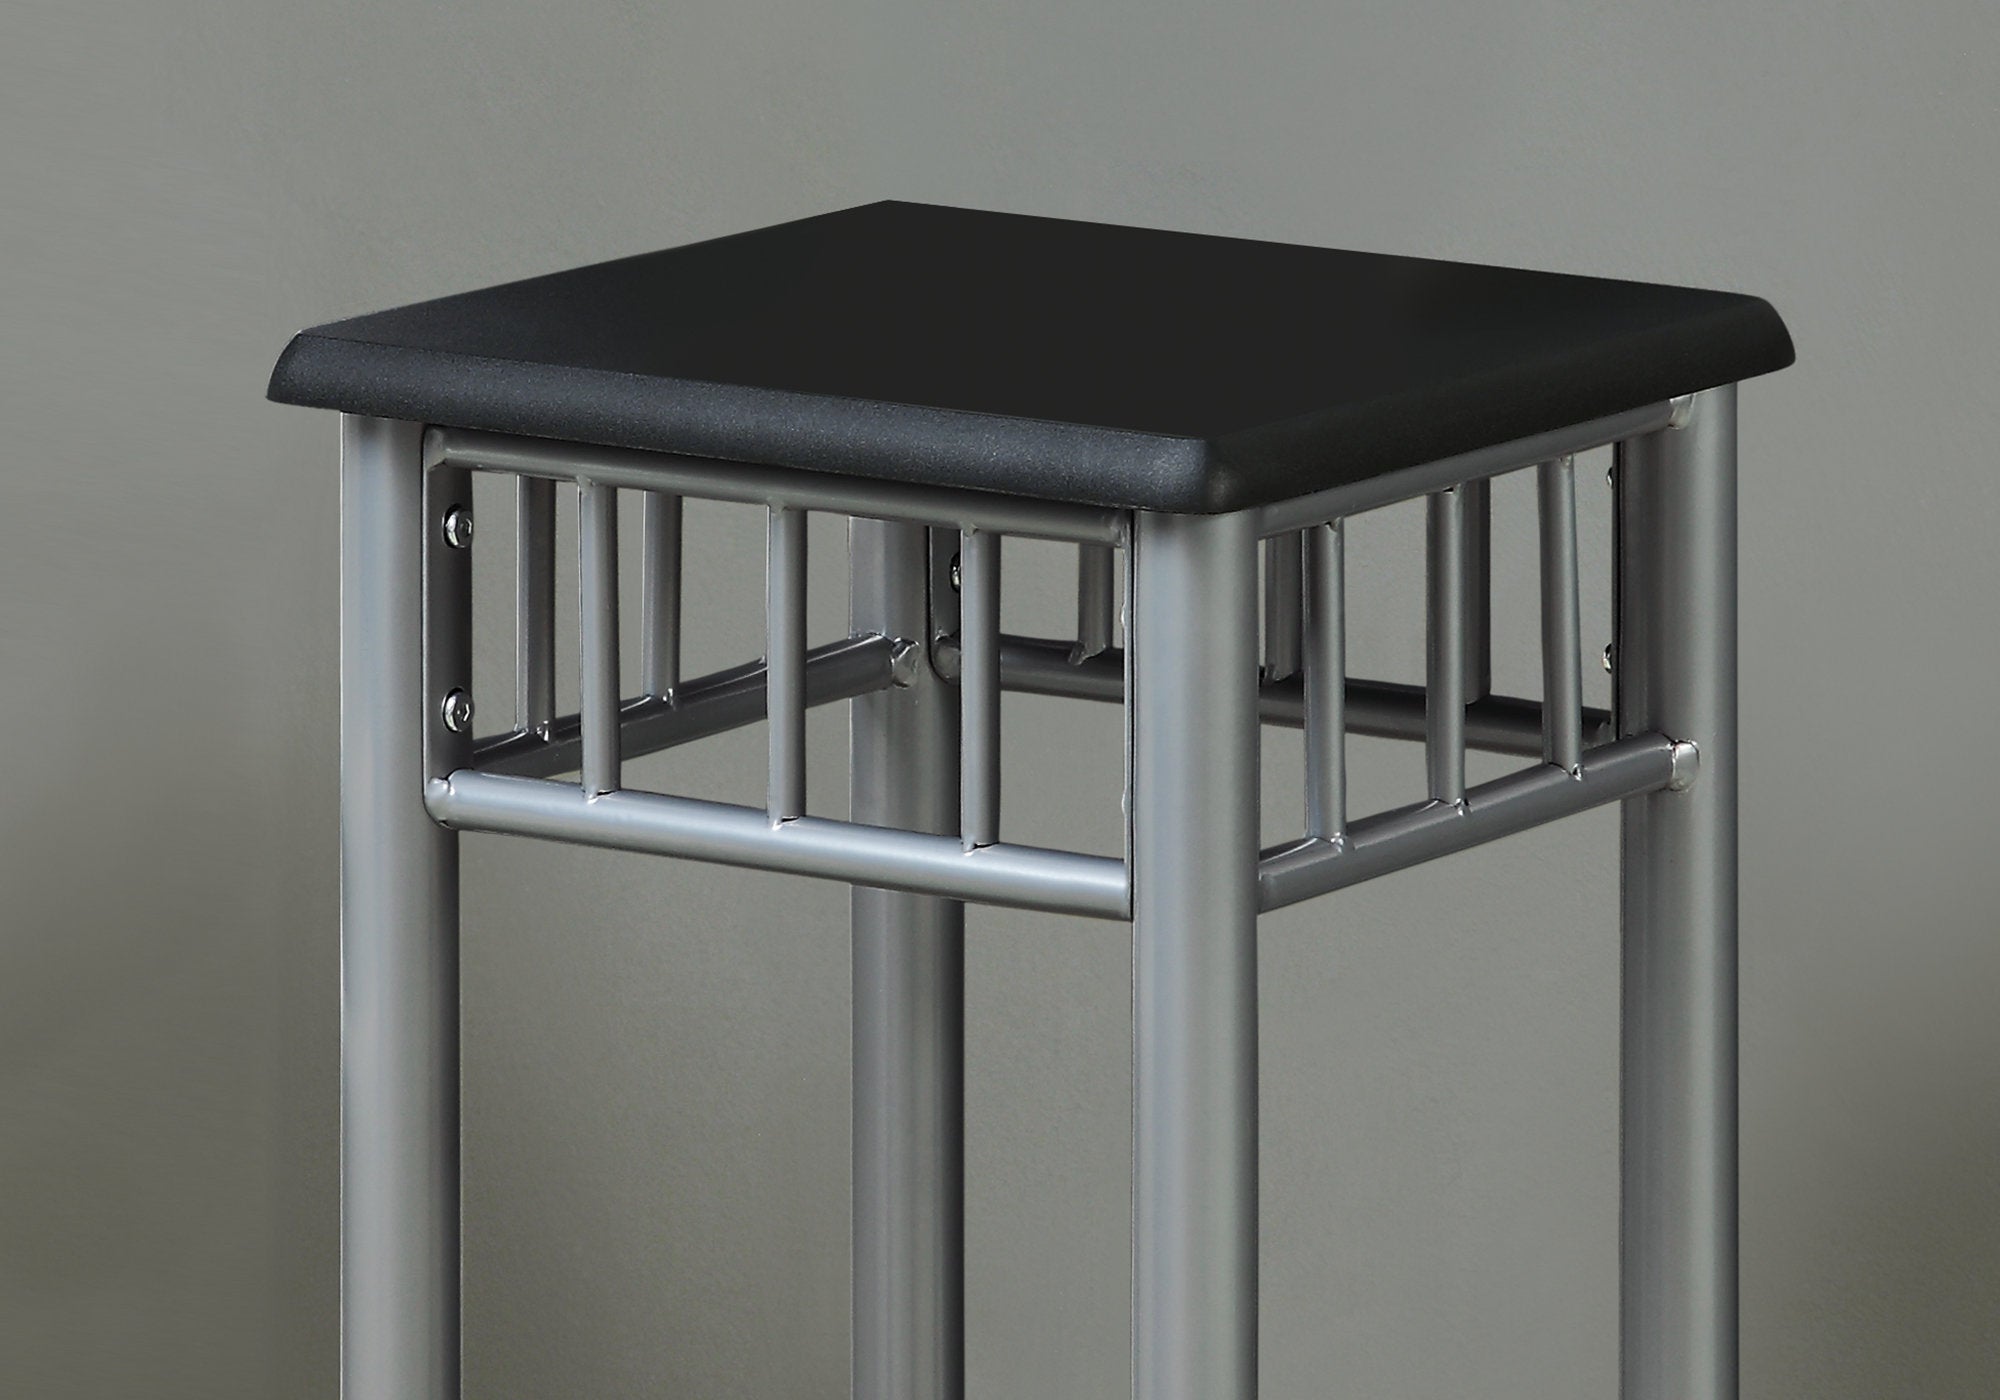 MN-223094    Accent Table, Side, End, Plant Stand, Square, Living Room, Bedroom, Metal Legs, Laminate, Black, Contemporary, Modern